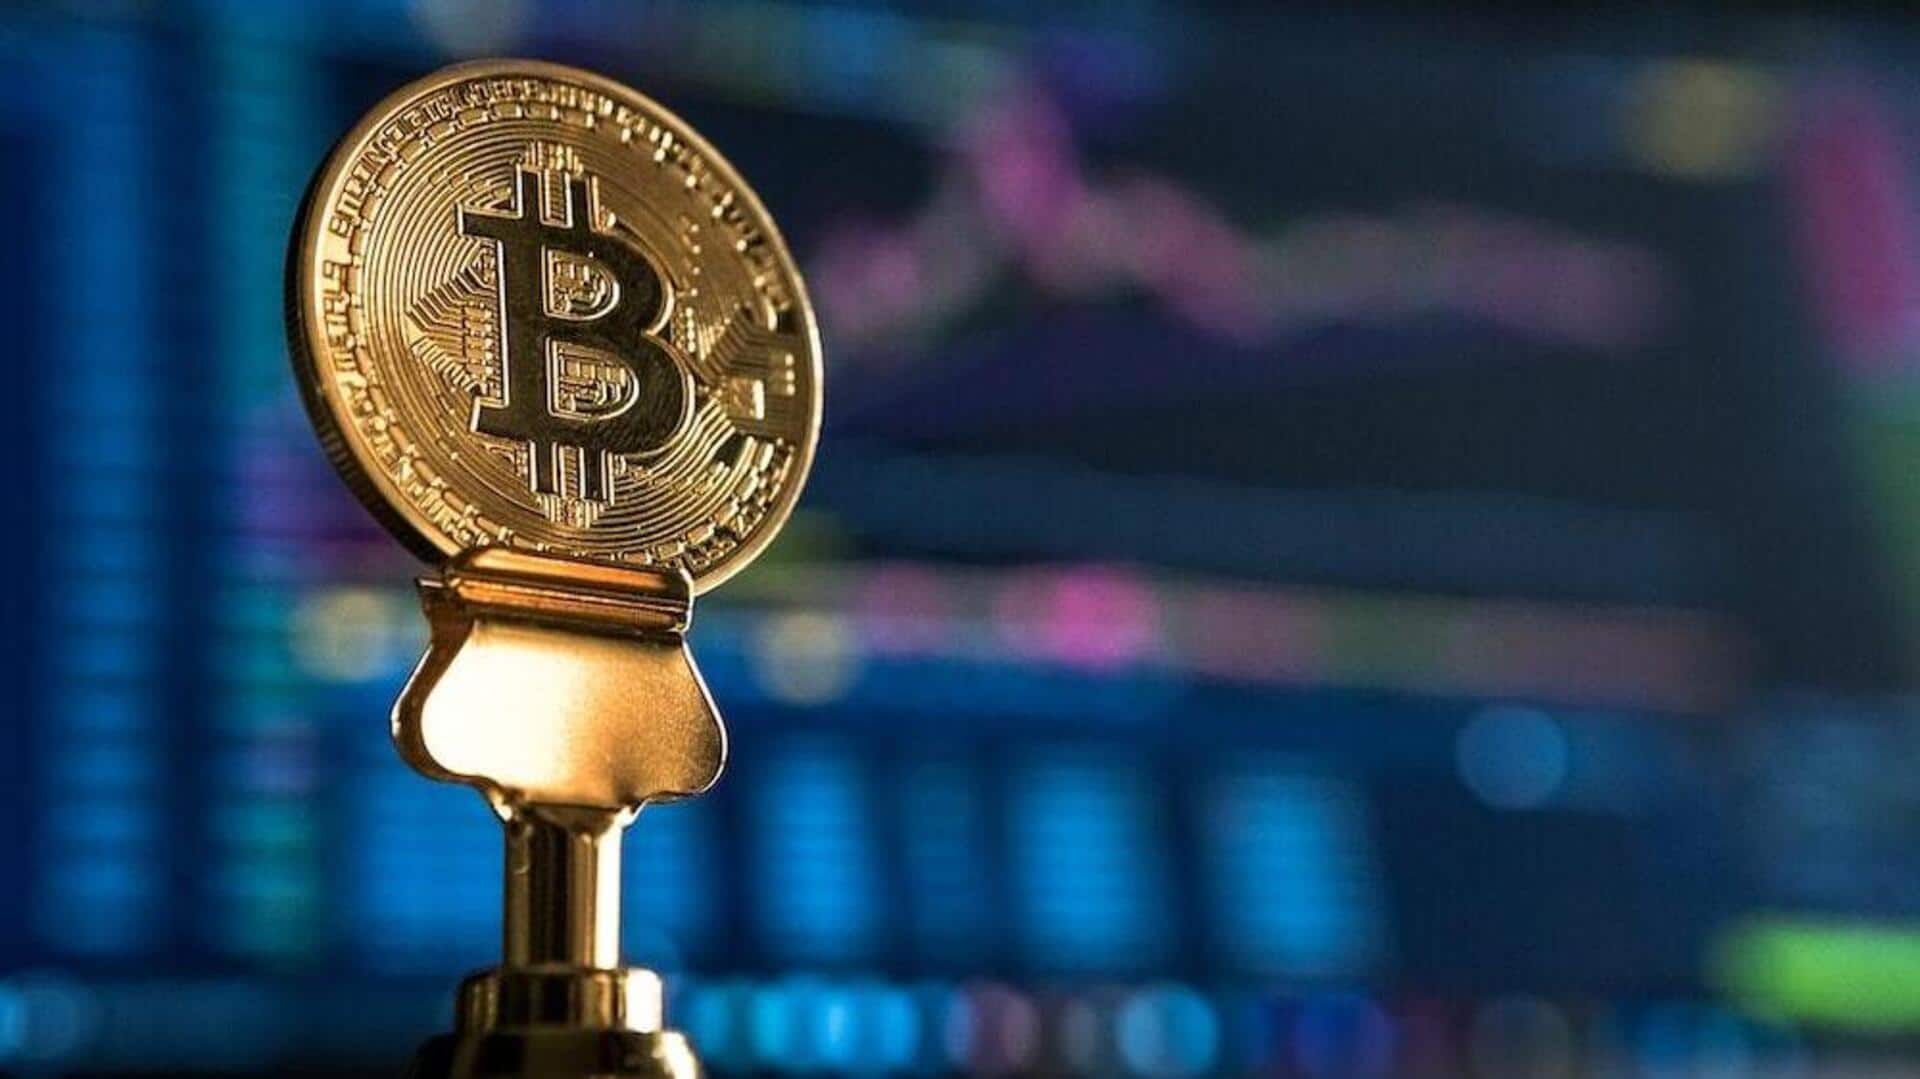 Cryptocurrency prices today: Check rates of Bitcoin, Dogecoin, BNB, Tether